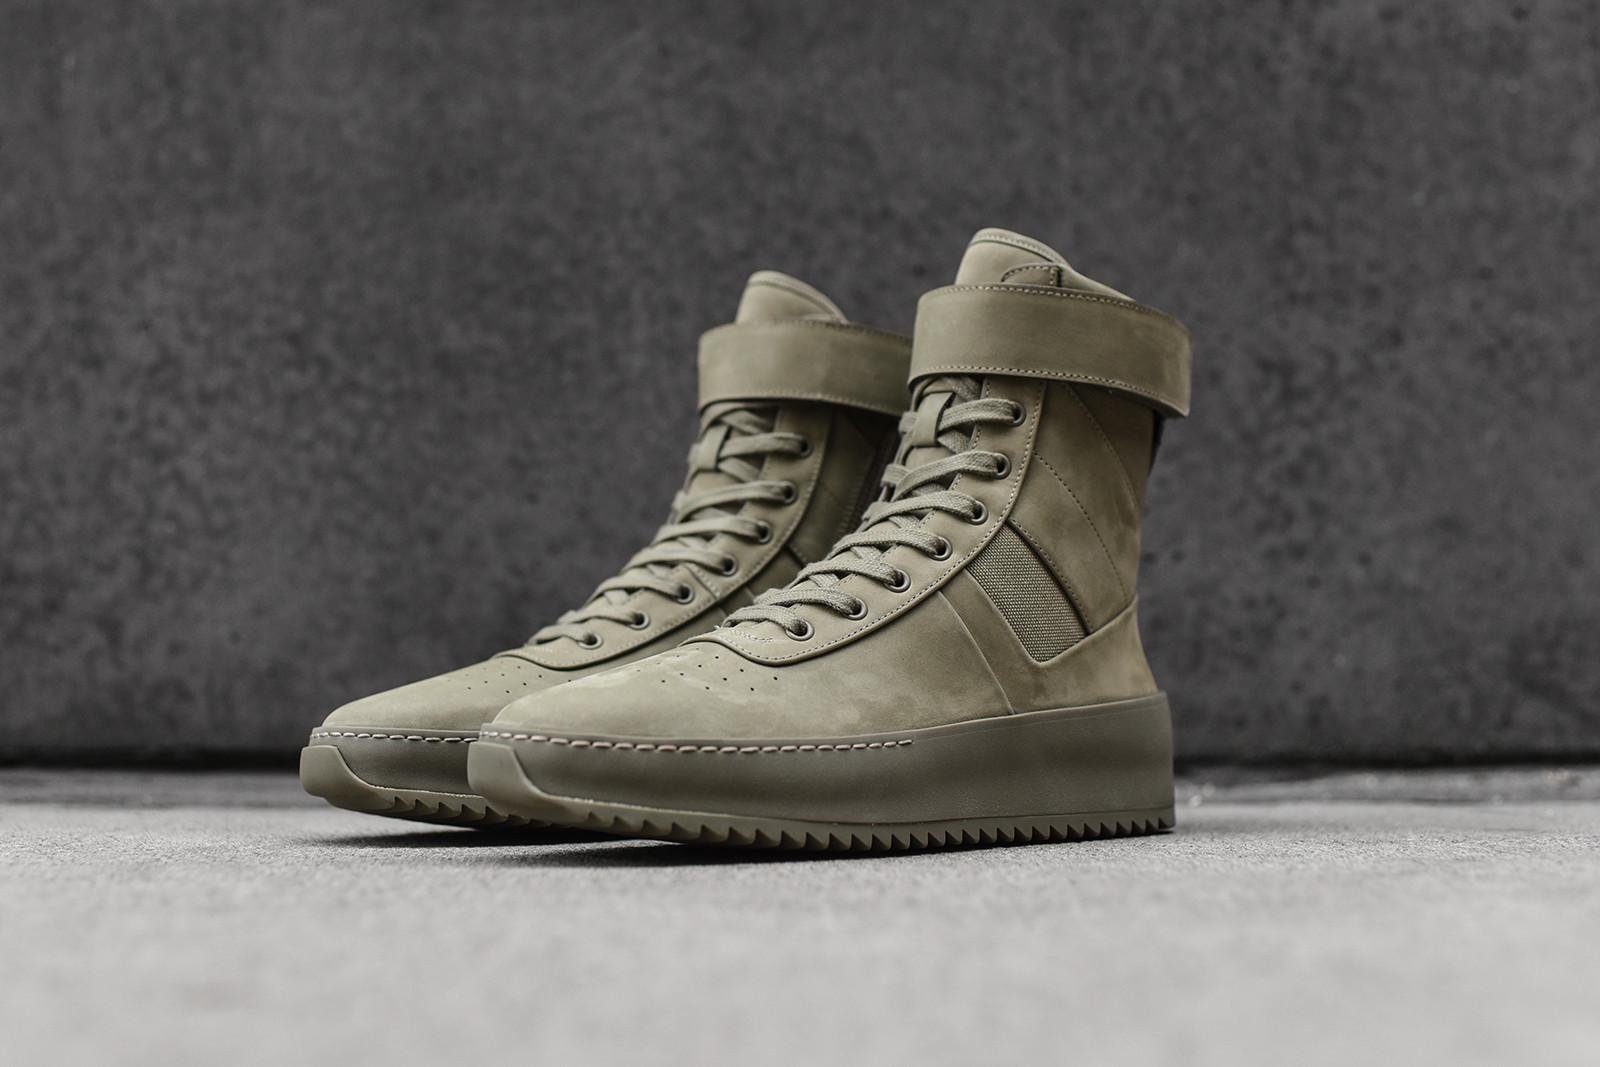 Buy Fear of God Military Sneaker 'Army Green' - FGTP MSNU AG16 | GOAT